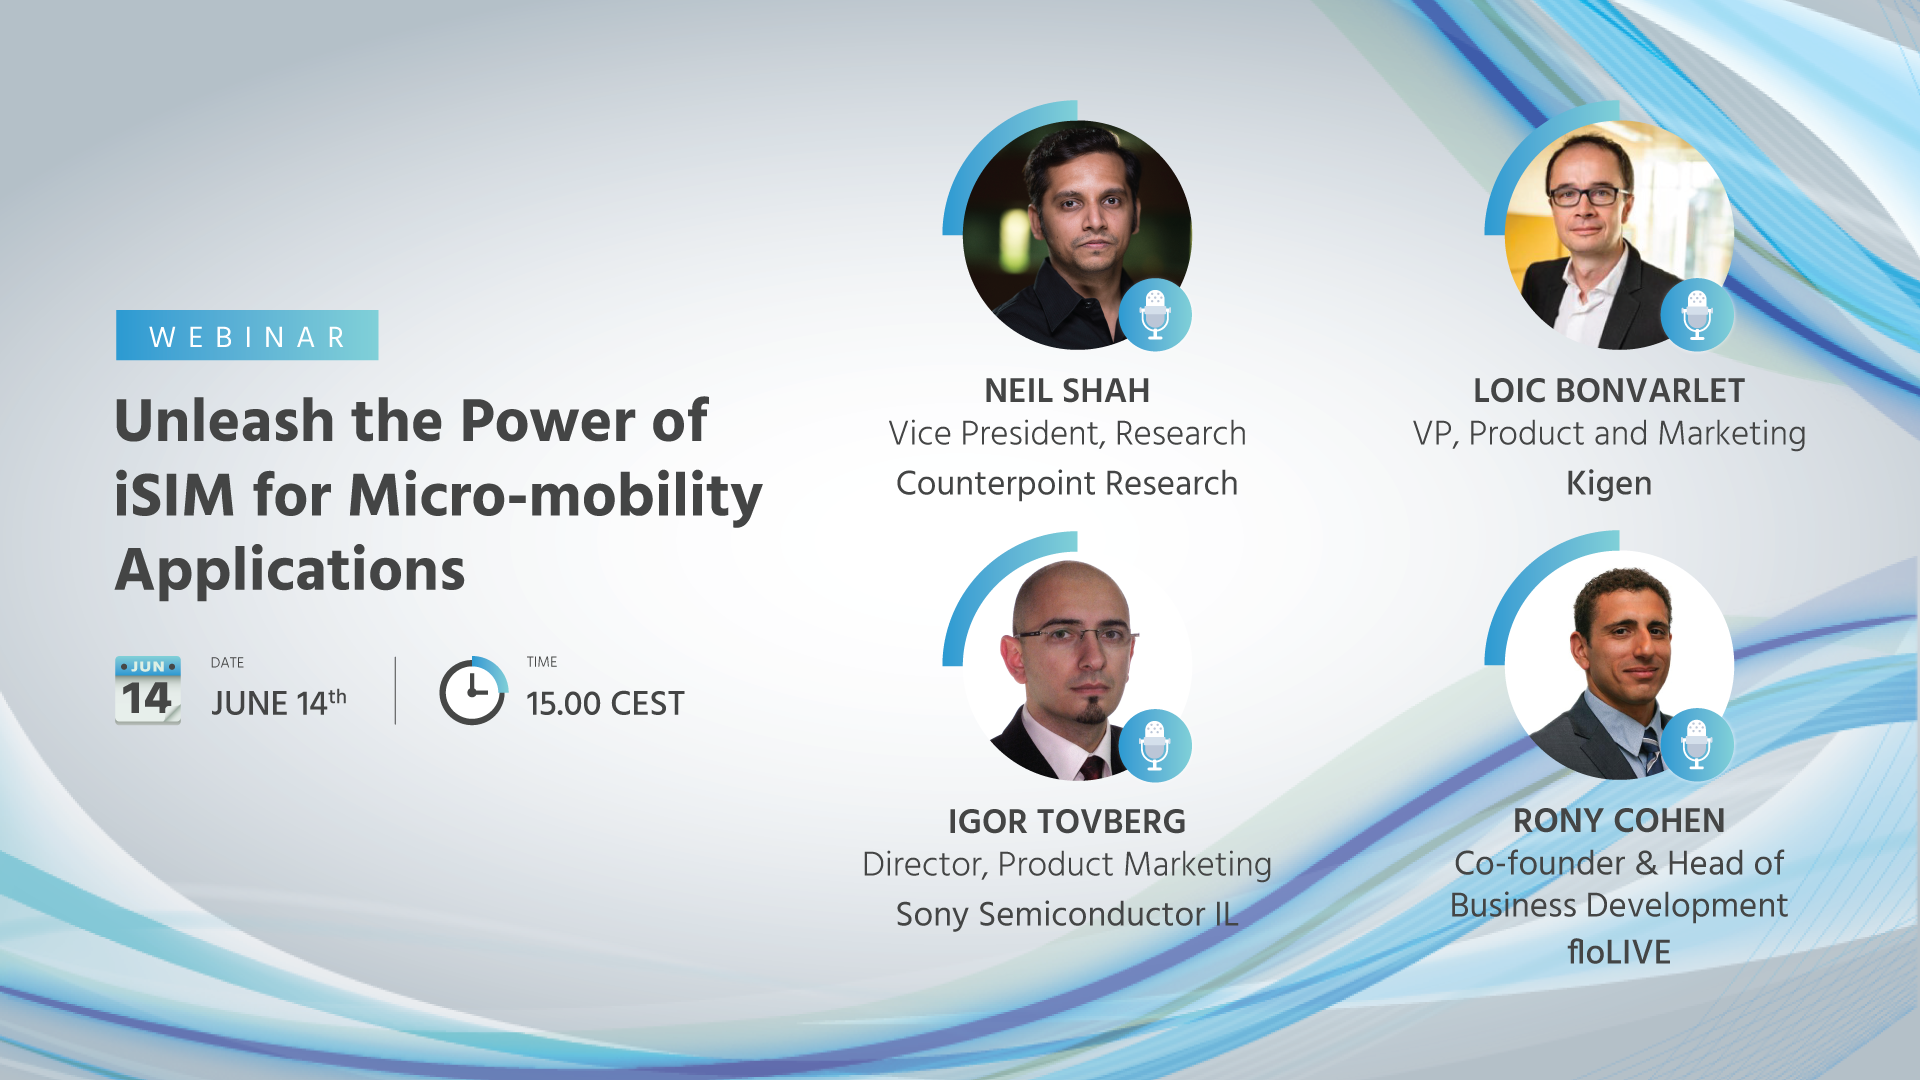 Unleash the Power of iSIM for Micro-mobility Applications